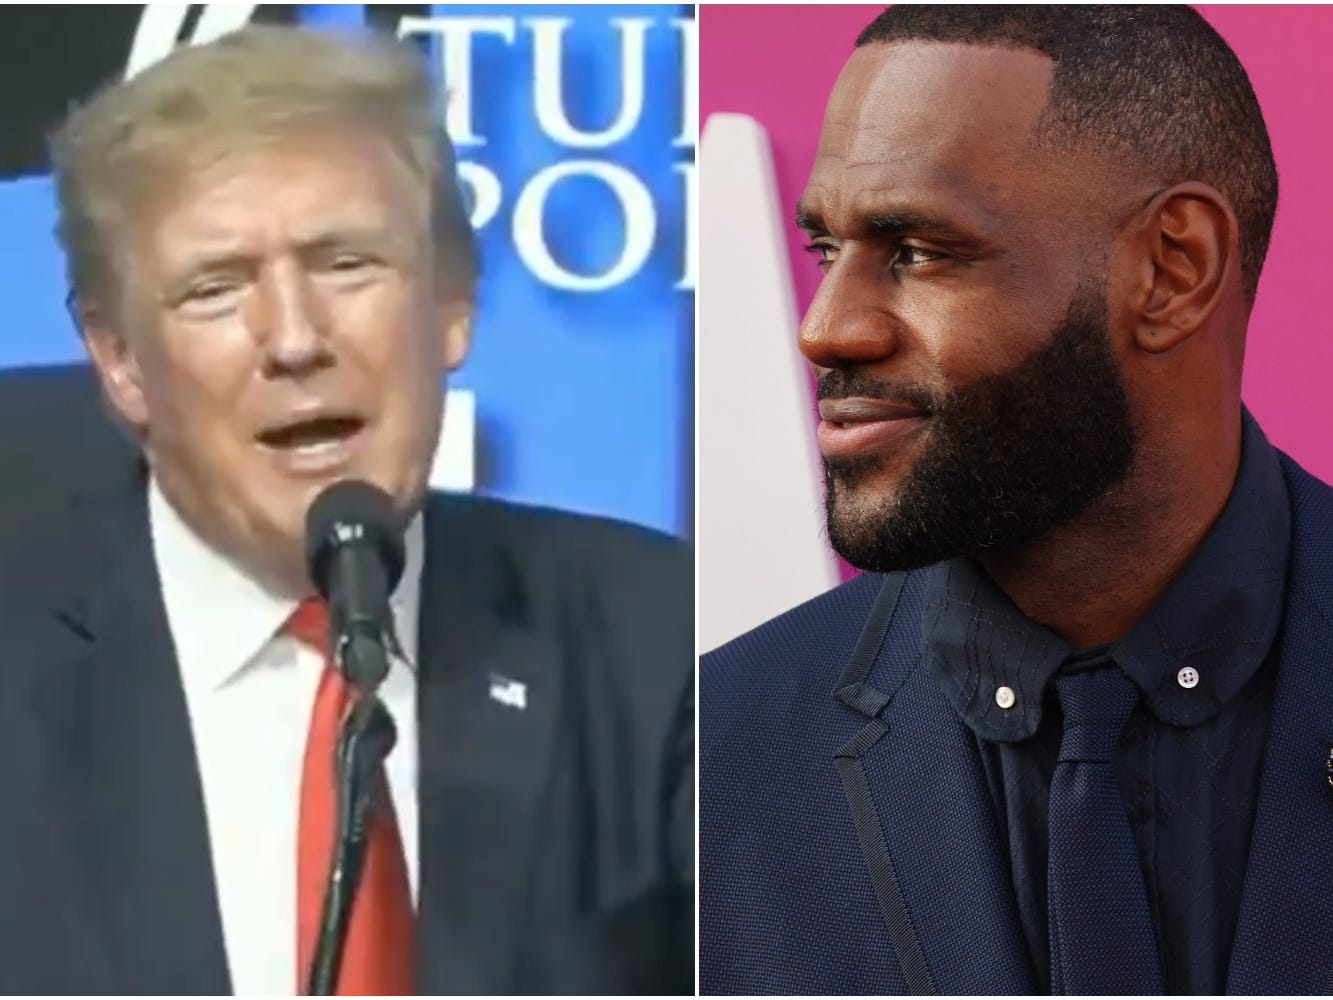 Composite image of Trump, left, and LeBron James, right.